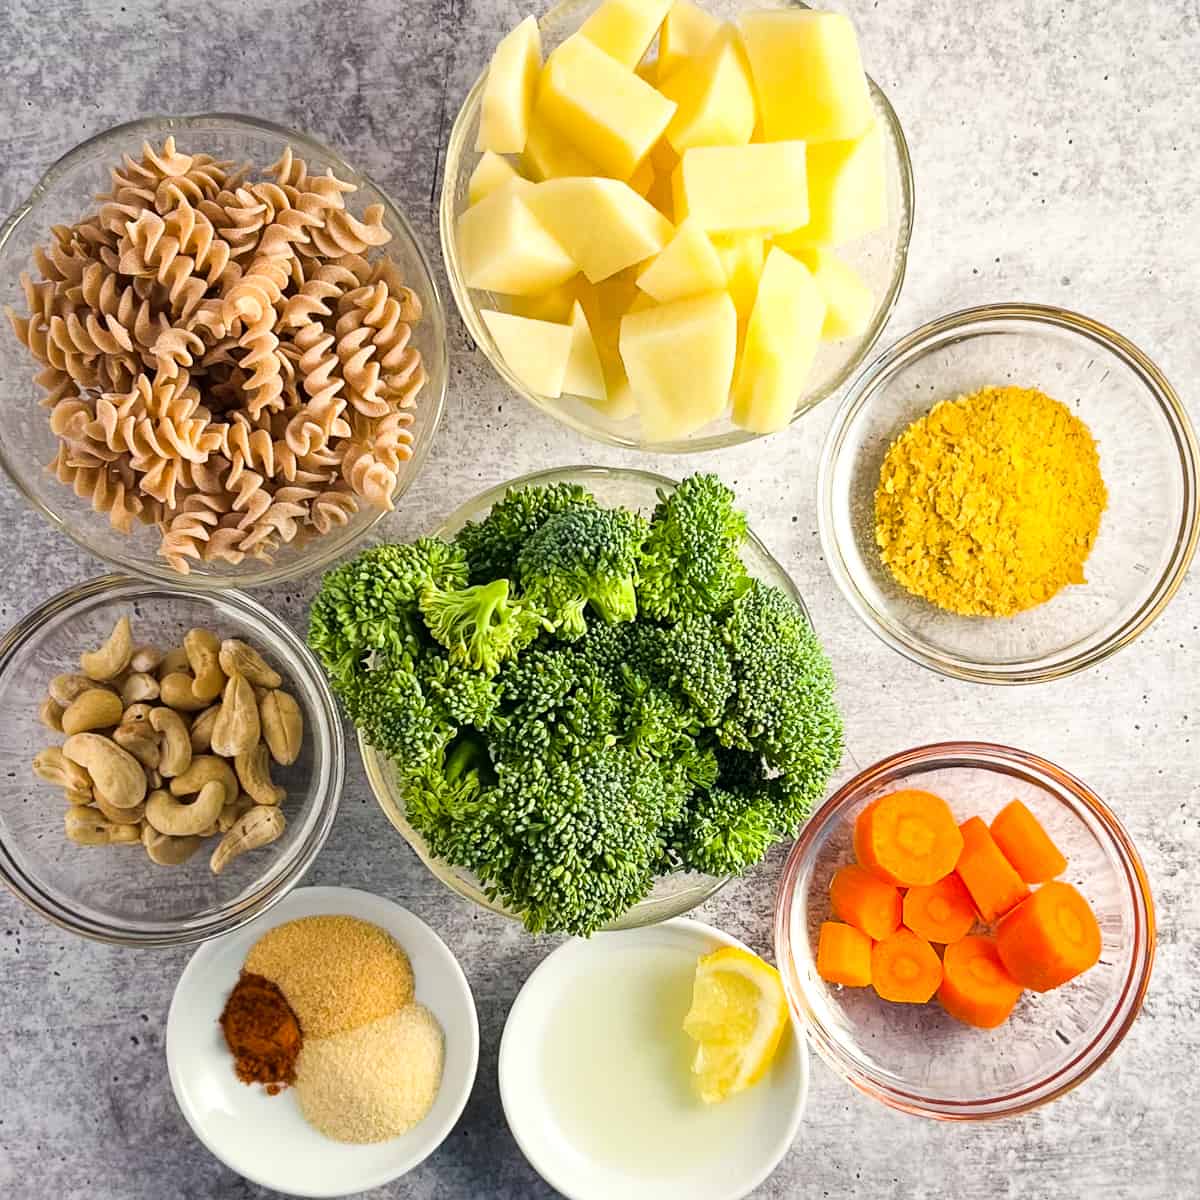 Top view of the ingredients for vegan mac and cheese. potato, nutritional yeast, carrots, broccoli, lemon juice, whole wheat pasta, cashews, garlic powder, onion powder and cayenne pepper